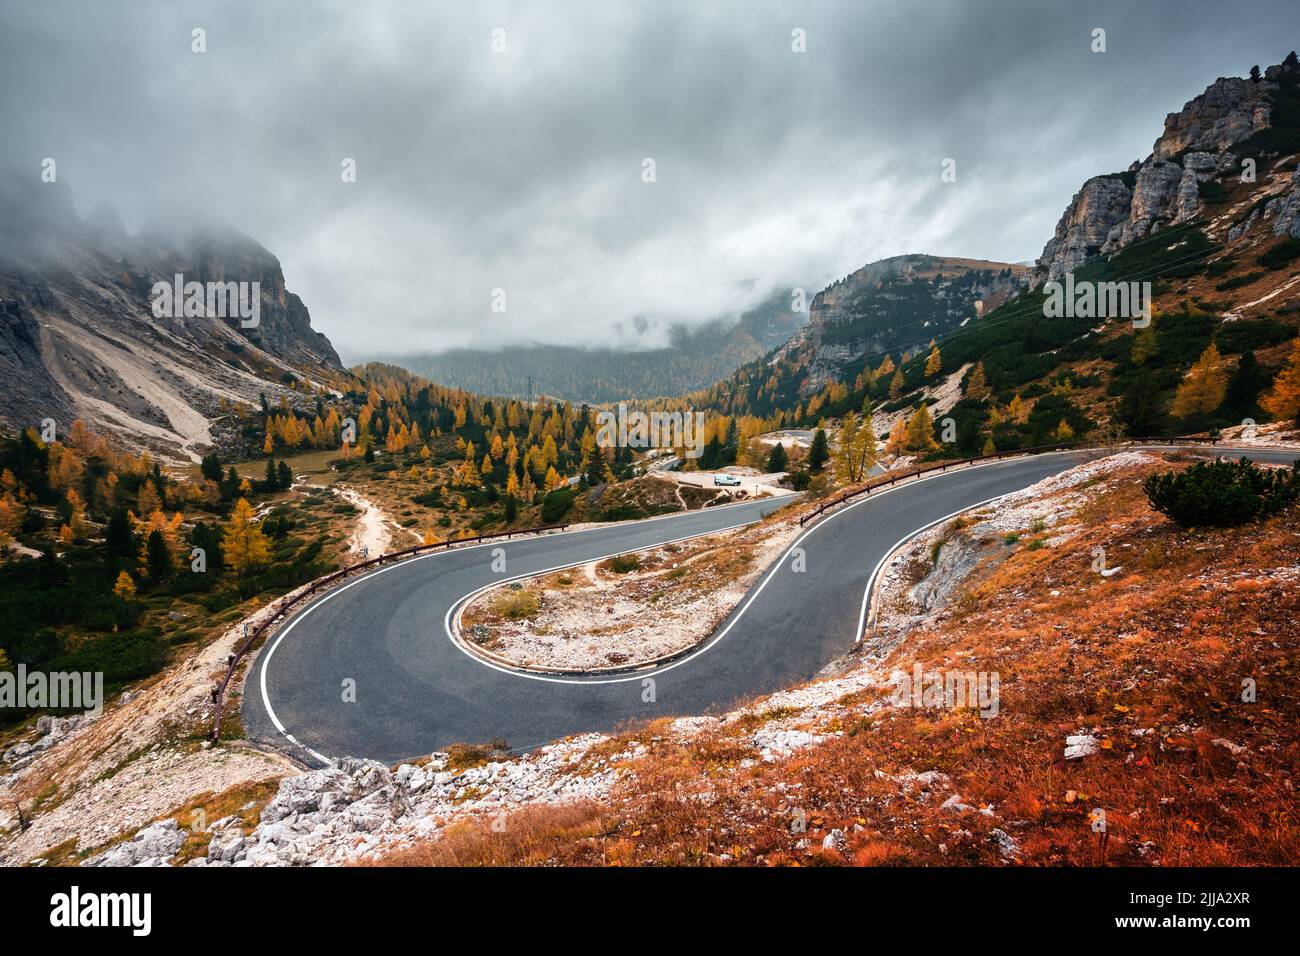 Winding mountains road leading to Three peaks of Lavaredo in Tre Cime di Lavaredo National Park in Dolomite Alps. Orange grass and lush larches forest around. Autumn in Dolomites, Italy Stock Photo